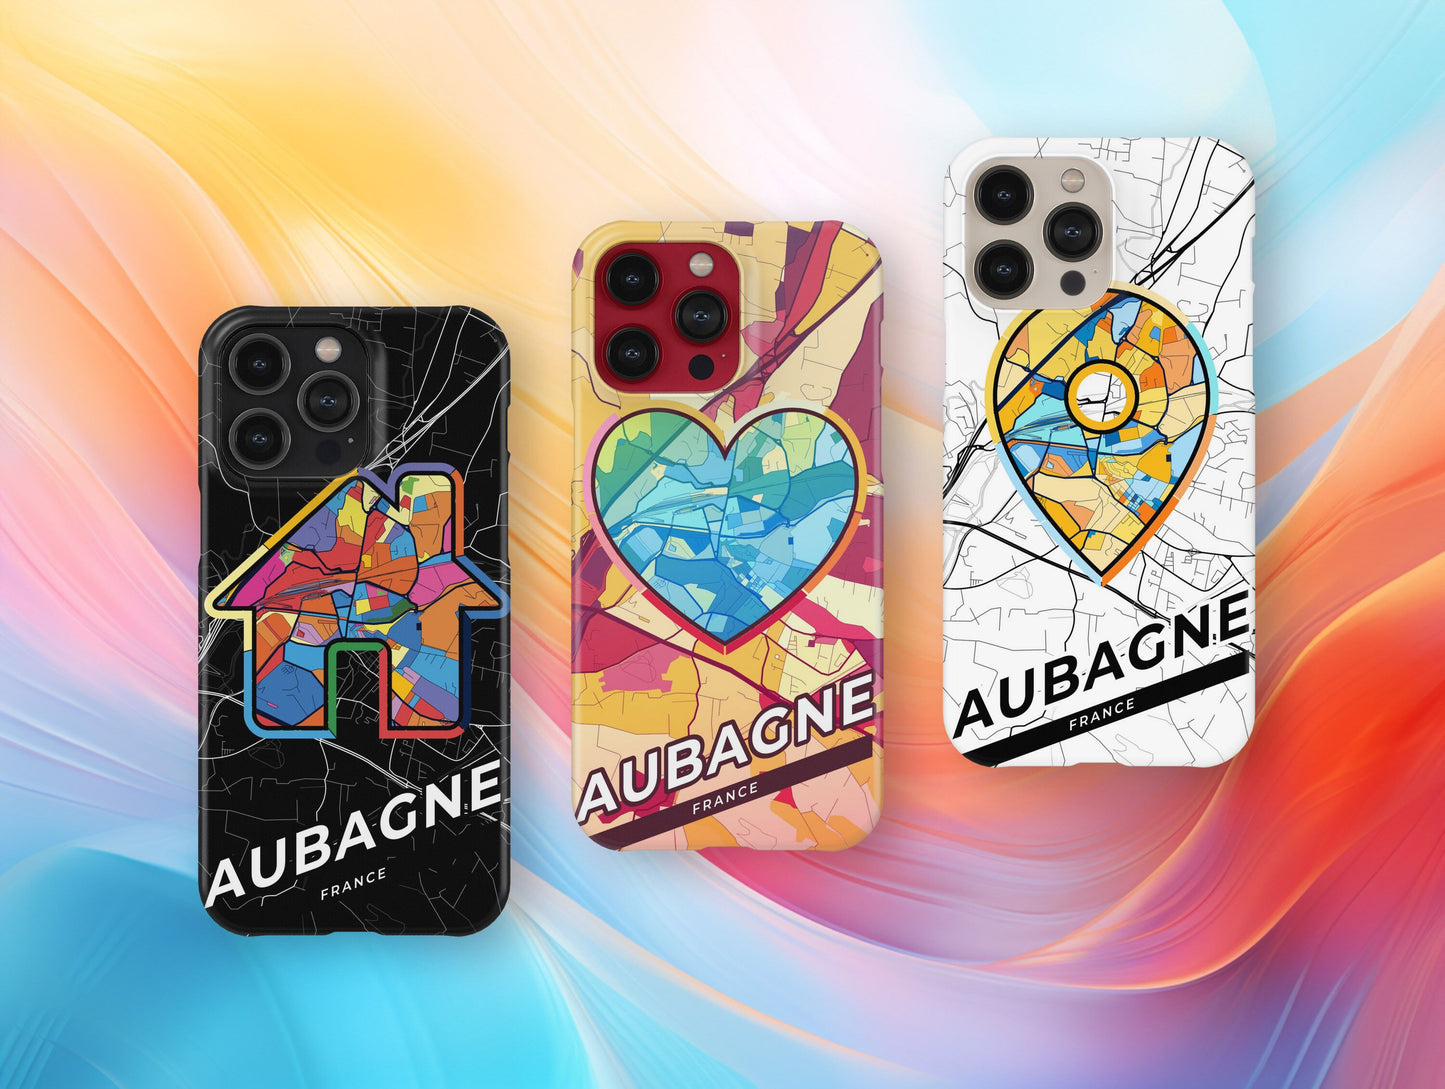 Aubagne France slim phone case with colorful icon. Birthday, wedding or housewarming gift. Couple match cases.